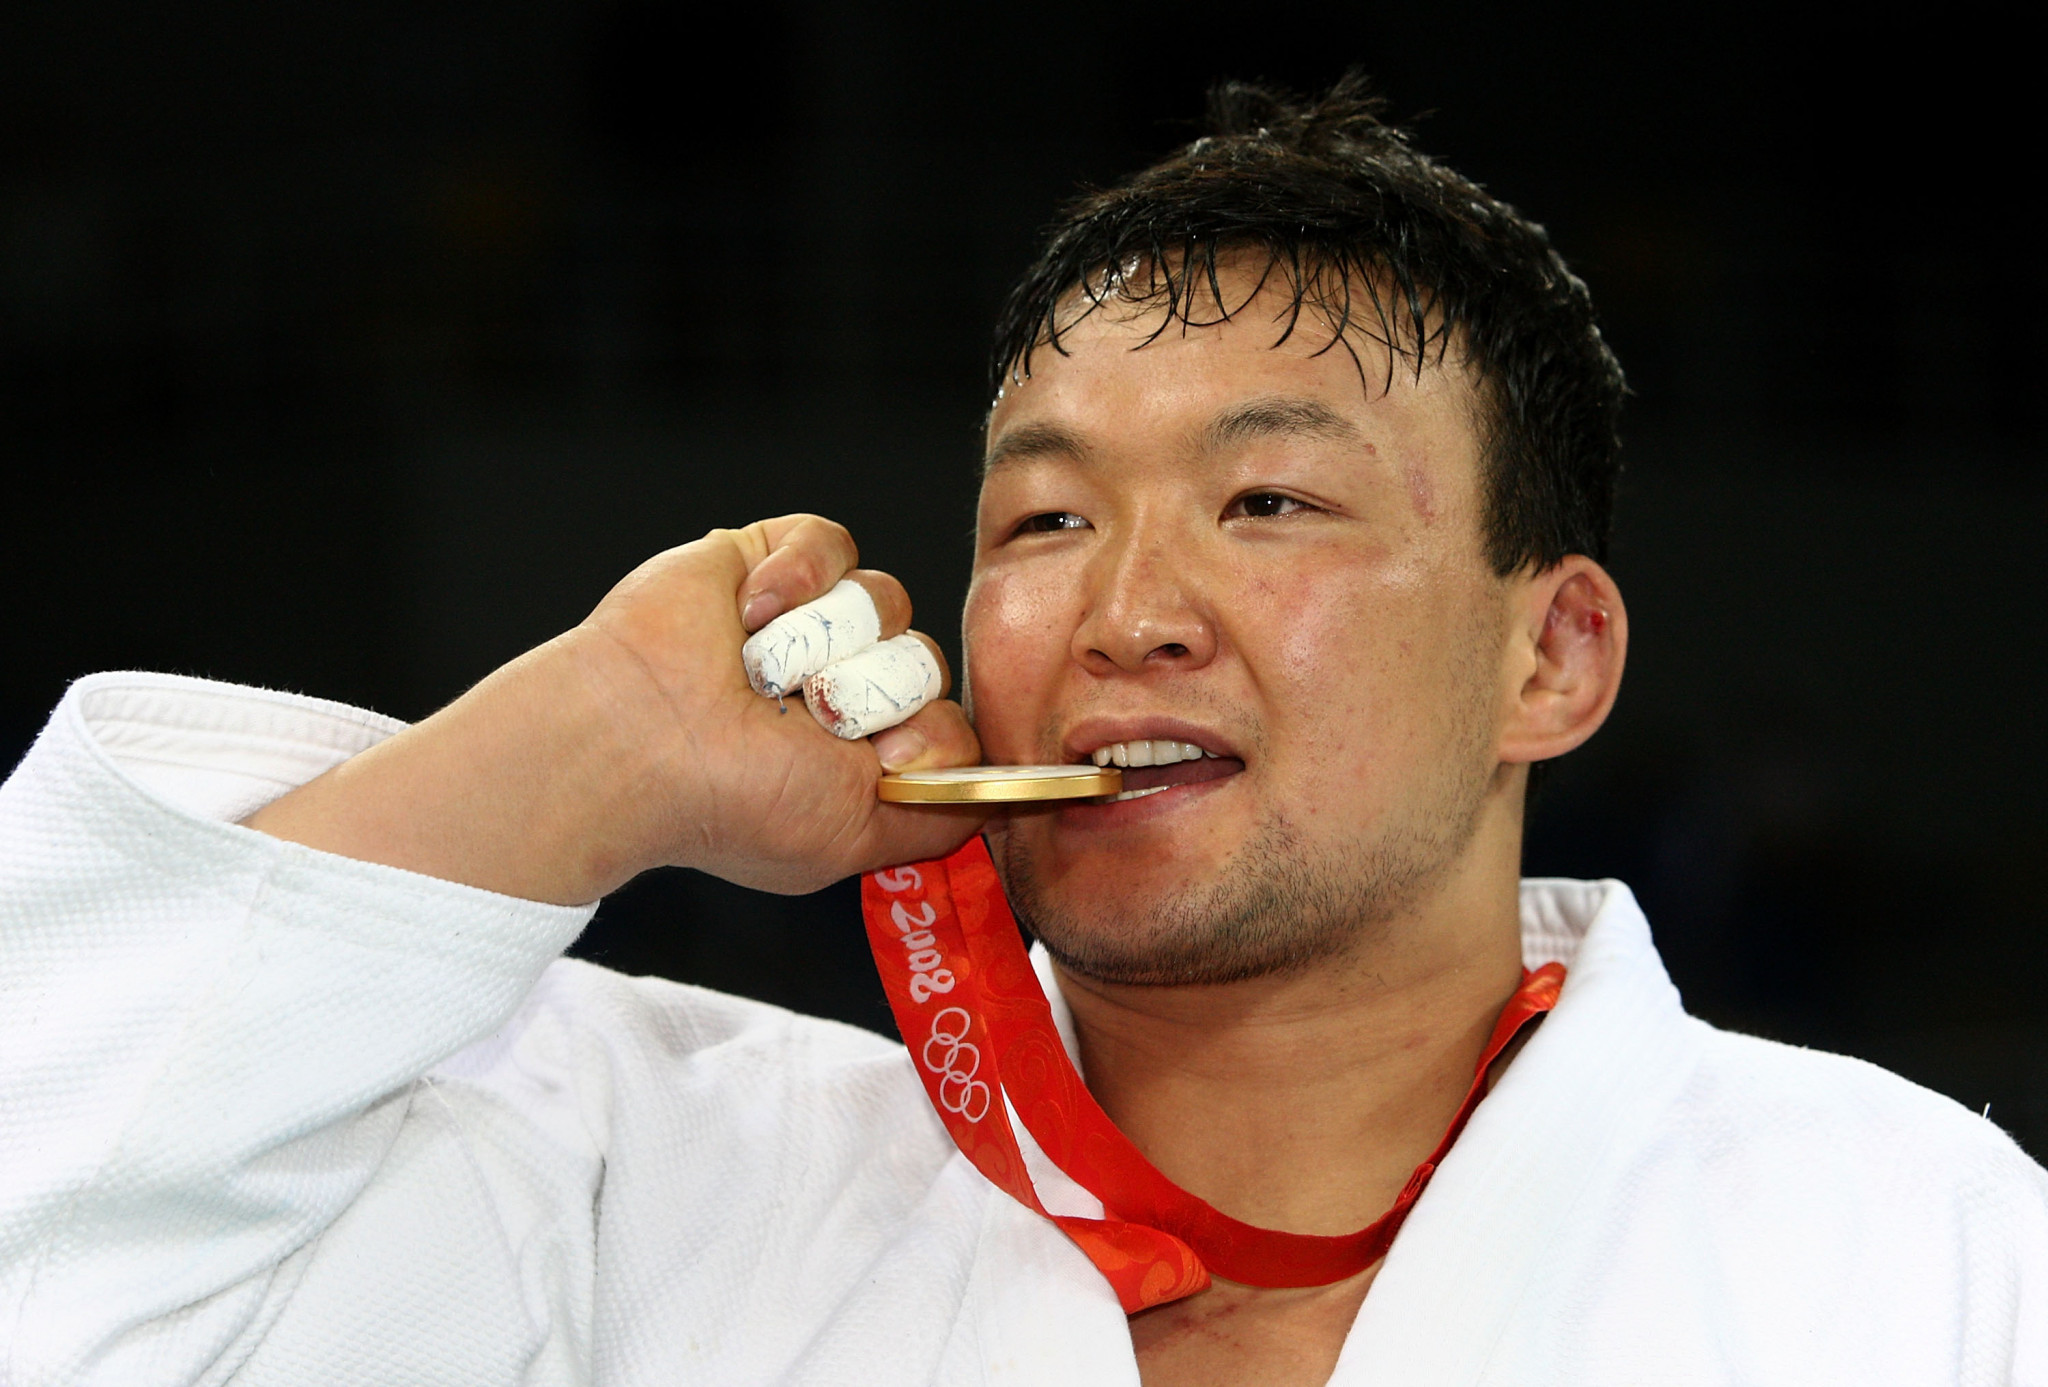 Naidan Tuvshinbayar, the current President of the Mongolia National Olympic Committee, became the country's first ever Olympic gold medallist at Beijing 2008 ©Getty Images